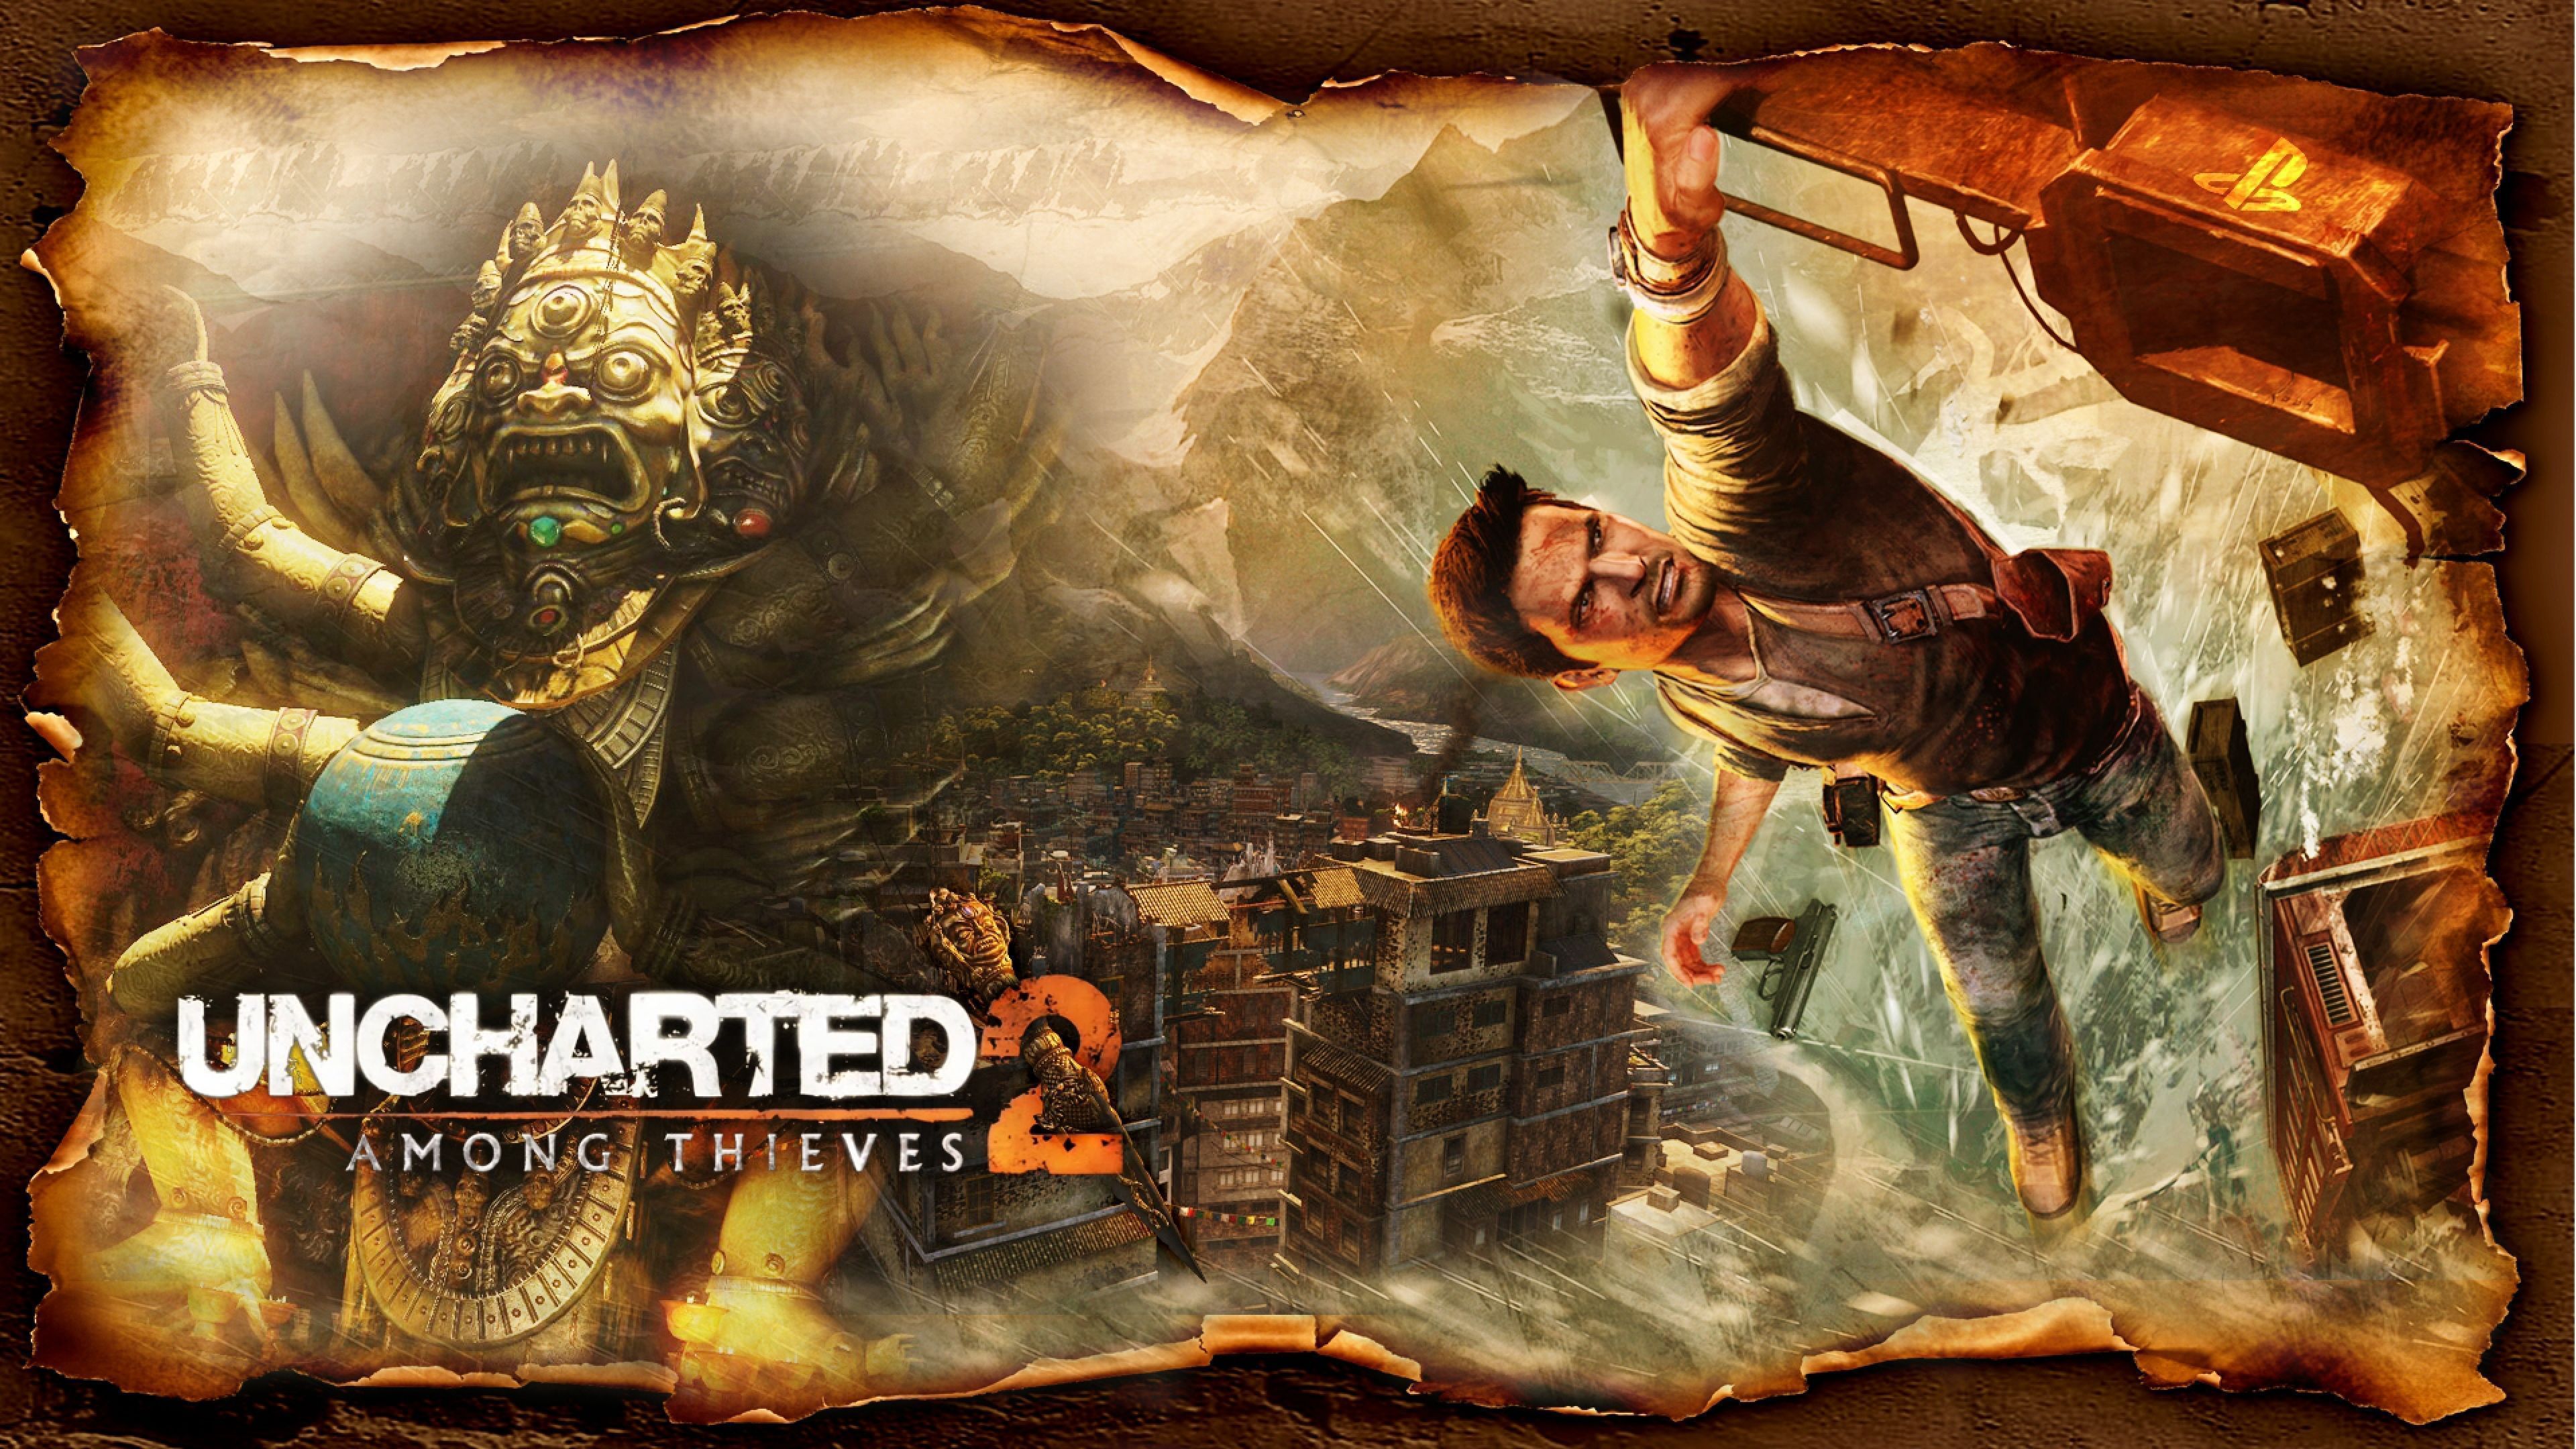 Download Wallpaper 3840x2160 Uncharted 2 among thieves, City